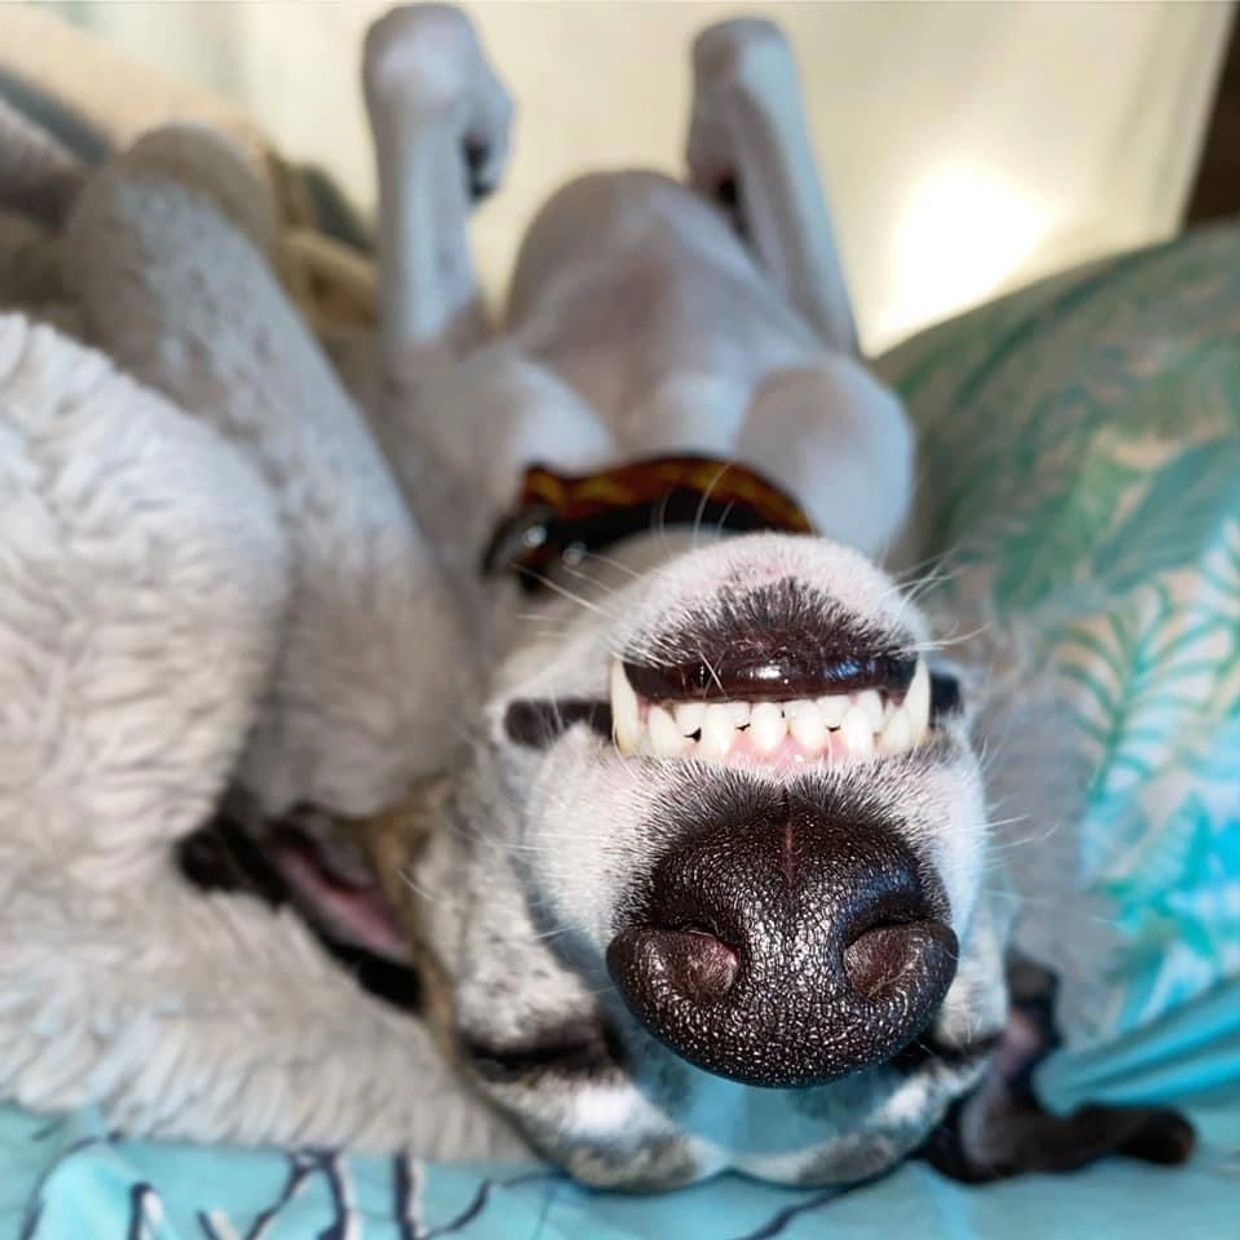 Whippet dog sleeping upside down with teeth showing 